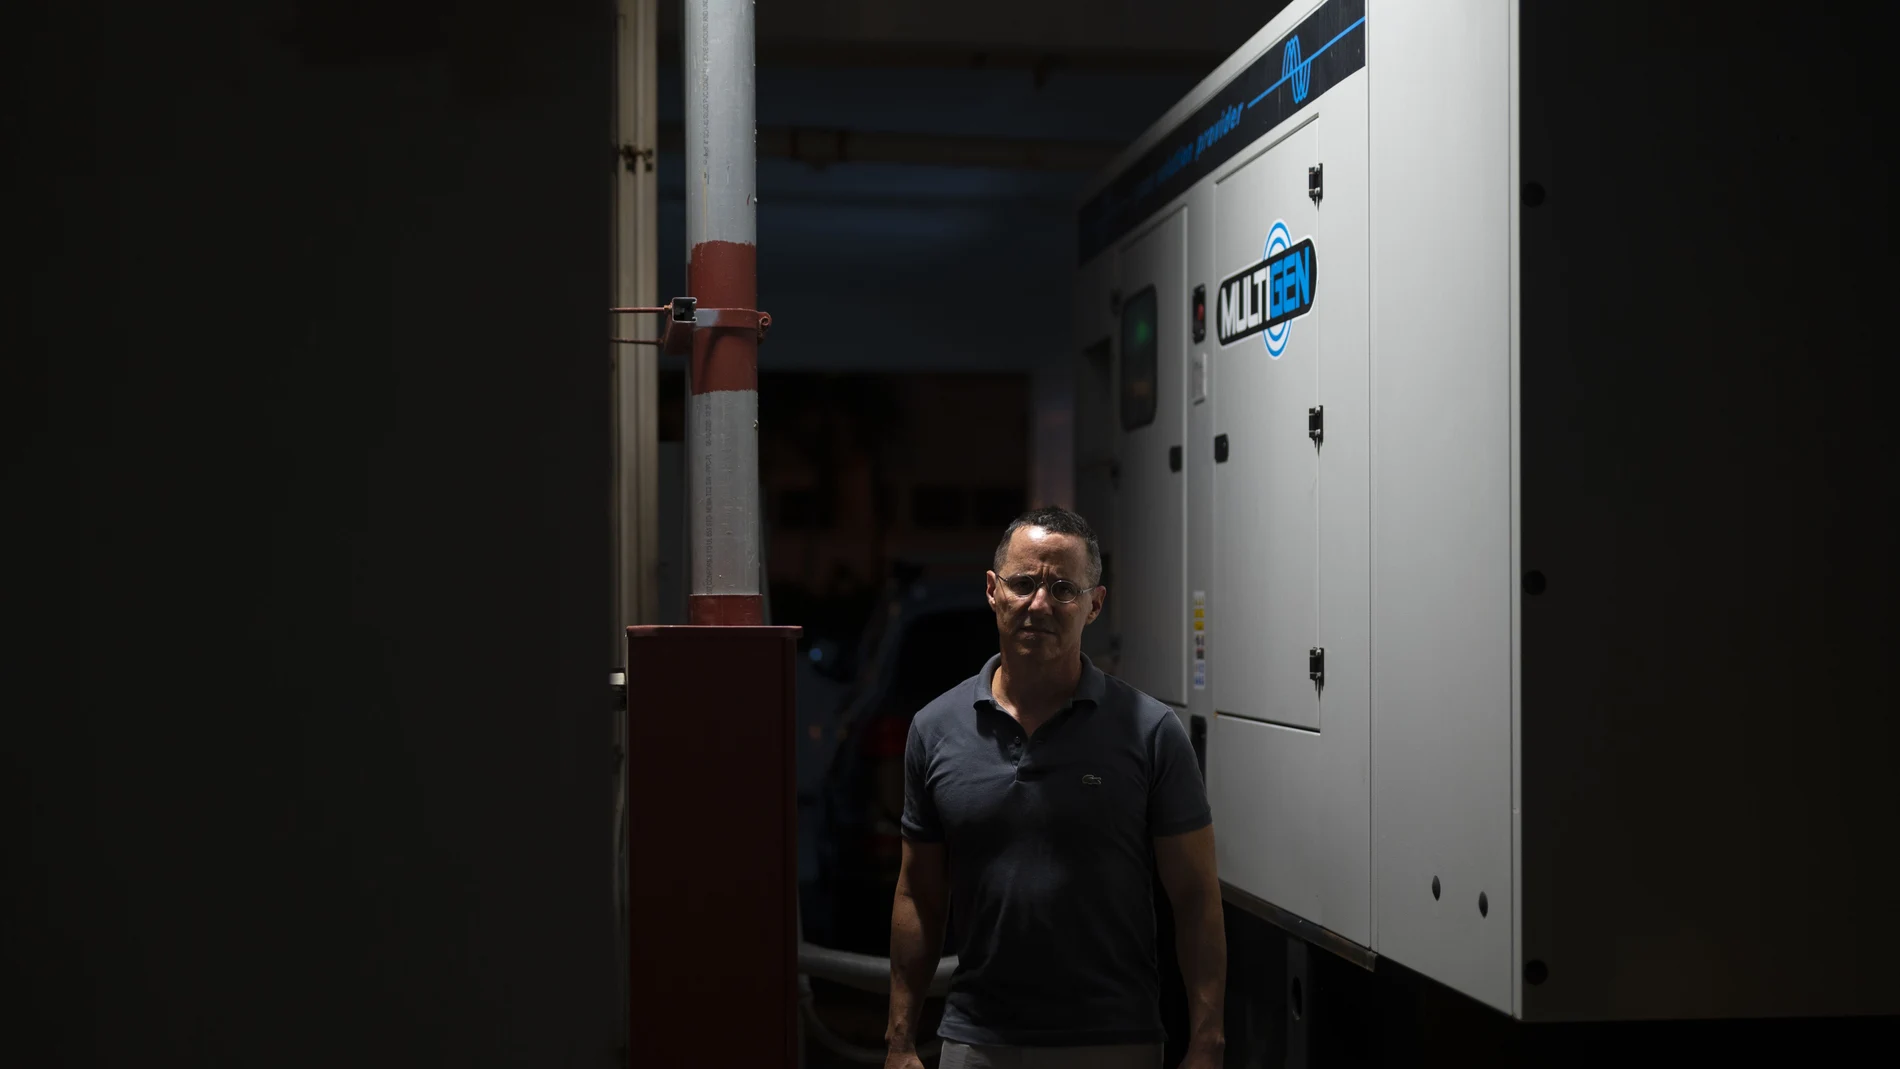 Manuel Casellas, an attorney who served as president of the Ritz condominium, poses for the camera in front of a generator bought more than a year ago at a total cost of $100,000 with the hopes that all 84 apartments could feed off it when blackouts occur, in San Juan, Puerto Rico, Thursday, Sept. 30, 2021. The residents first need a power company official to connect the generator to the grid, but officials have canceled several appointments at the last minute without explanation. (AP Photo/Carlos Giusti)